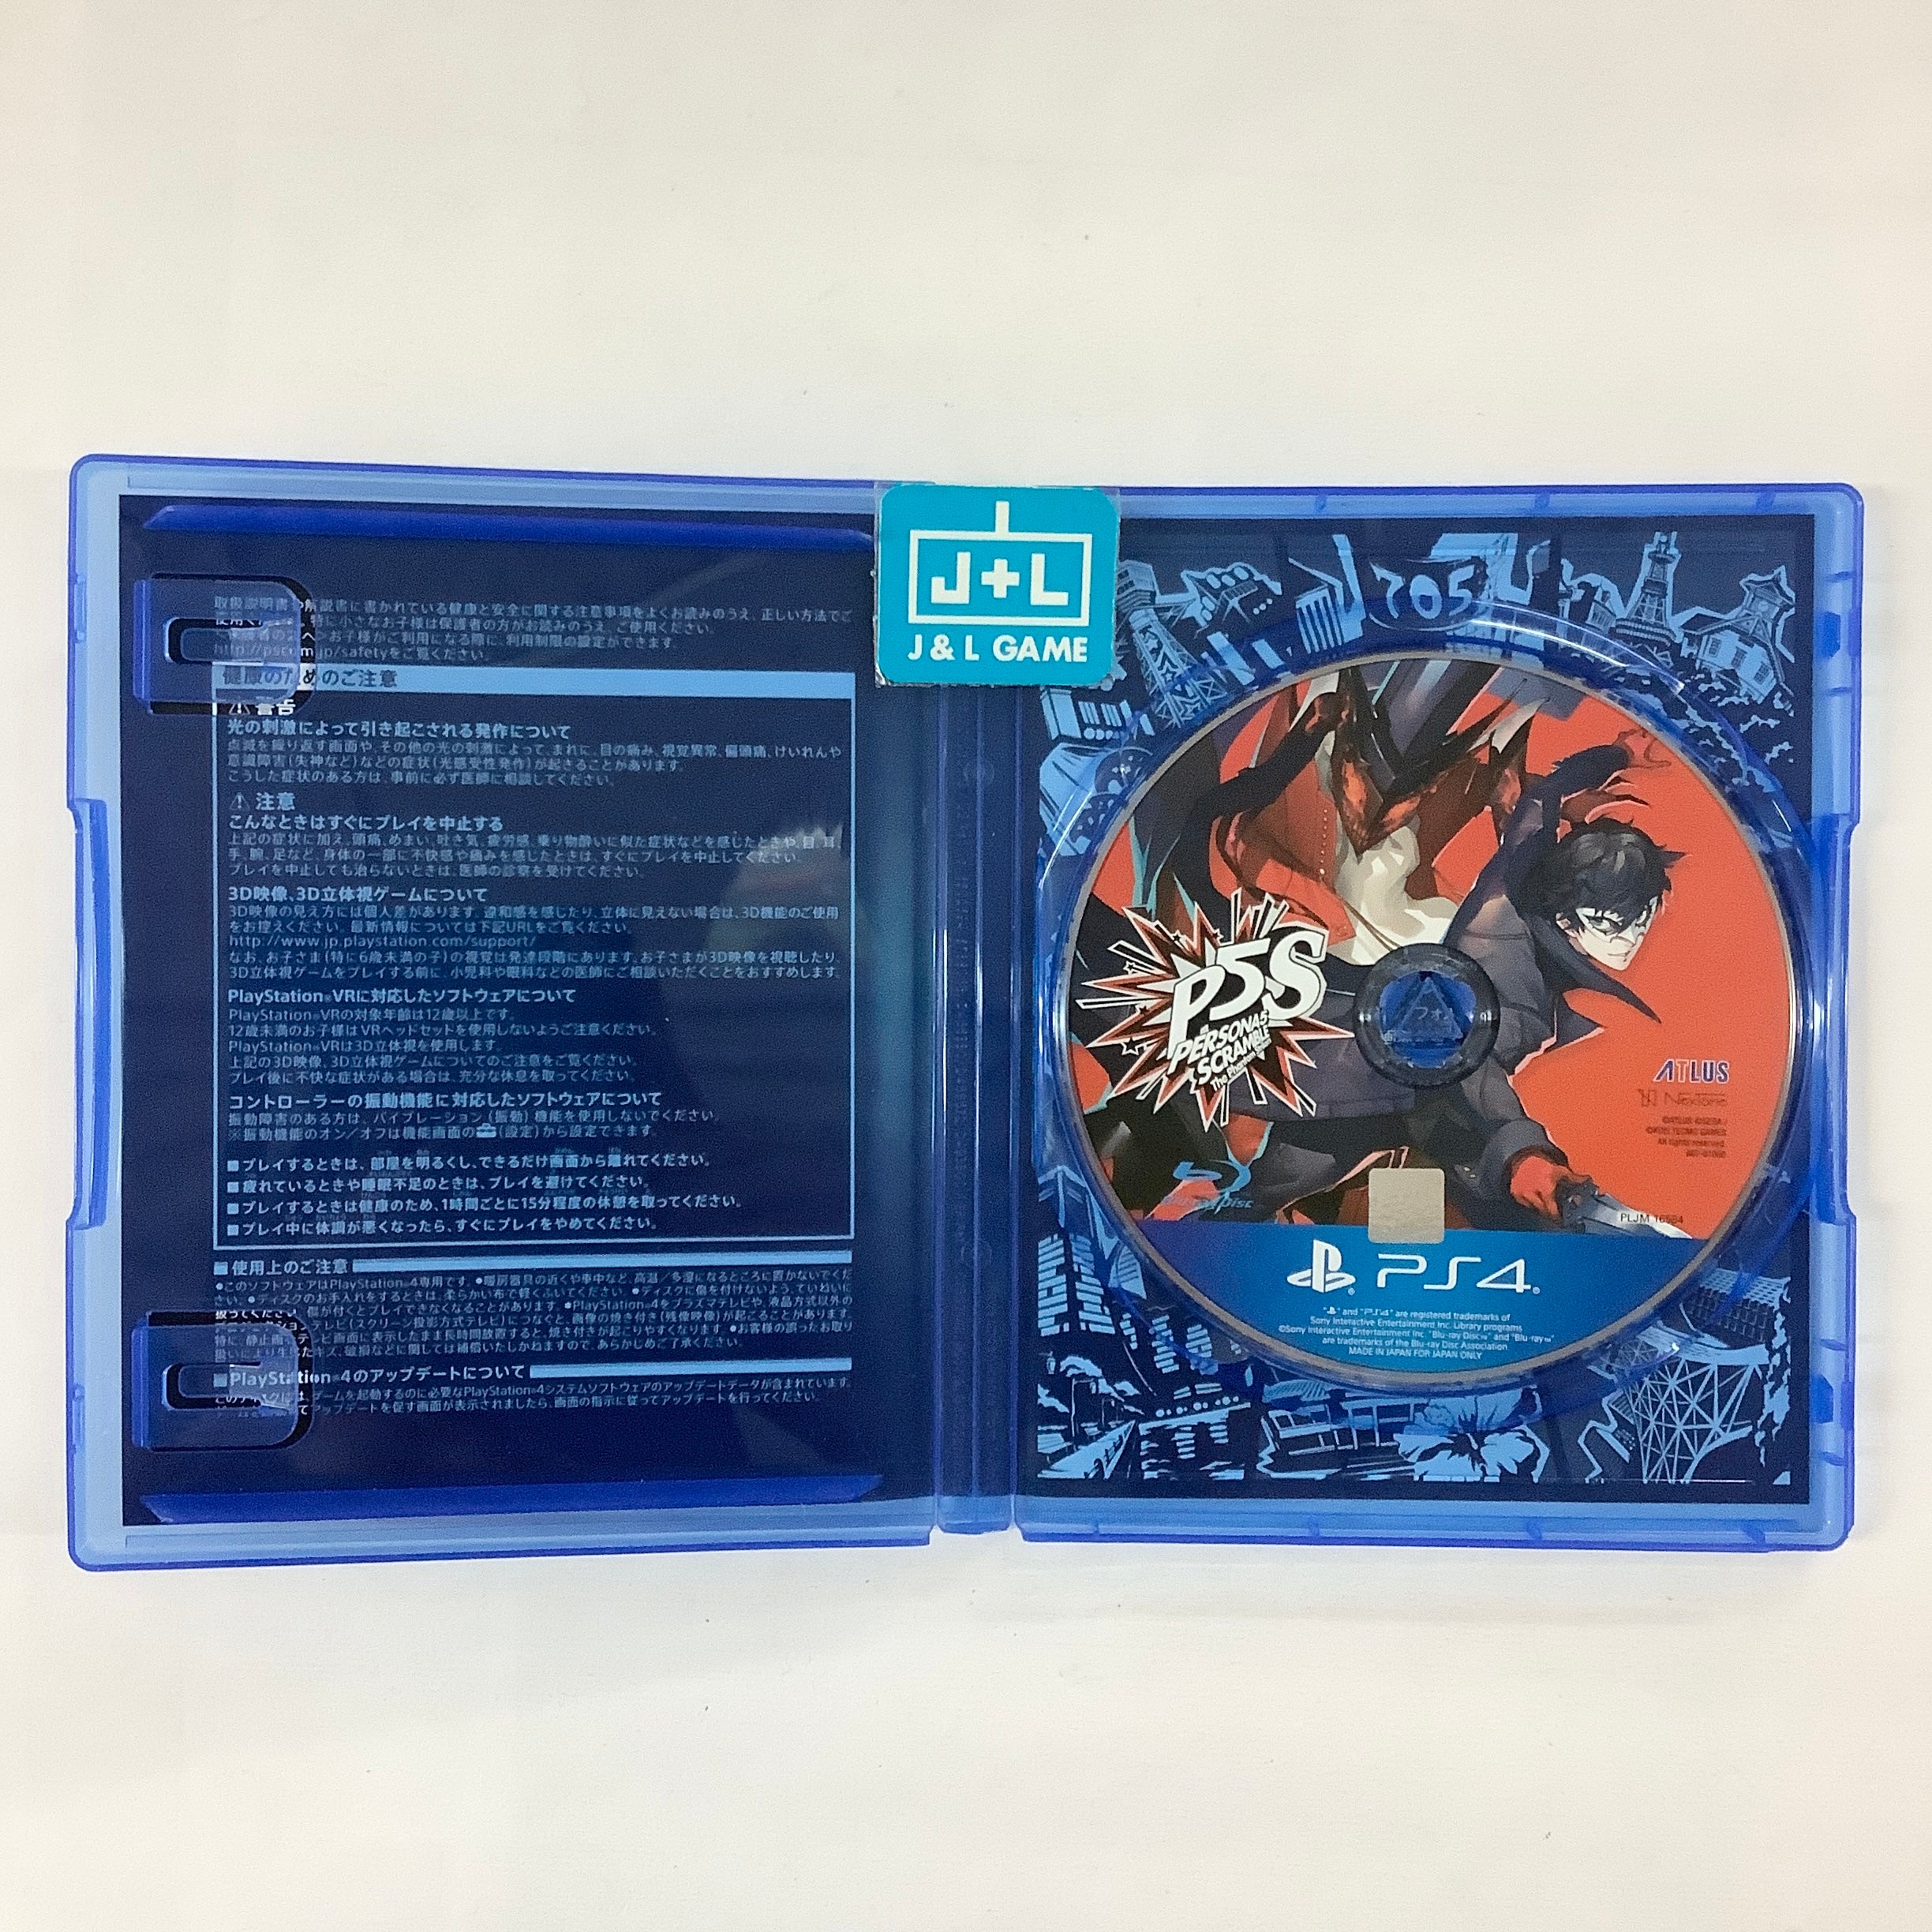 Persona 5 Scramble: The Phantom Strikers - (PS4) PlayStation 4 [Pre-Owned] (Japanese Import) Video Games Atlus   